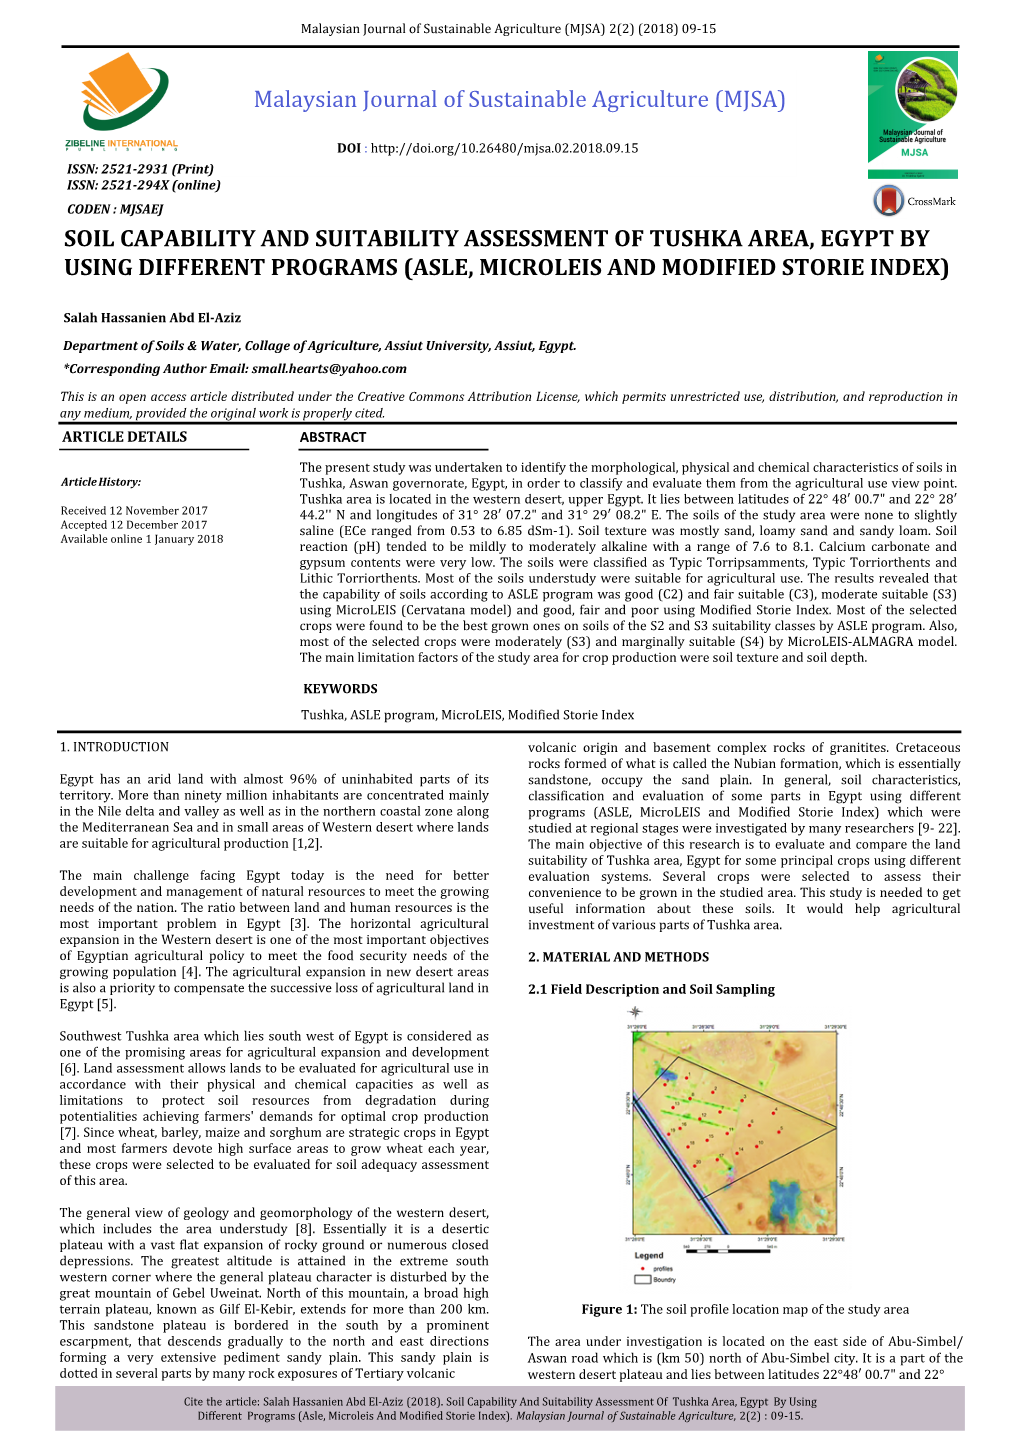 Soil Capability and Suitability Assessment of Tushka Area, Egypt by Using Different Programs (Asle, Microleis and Modified Storie Index)